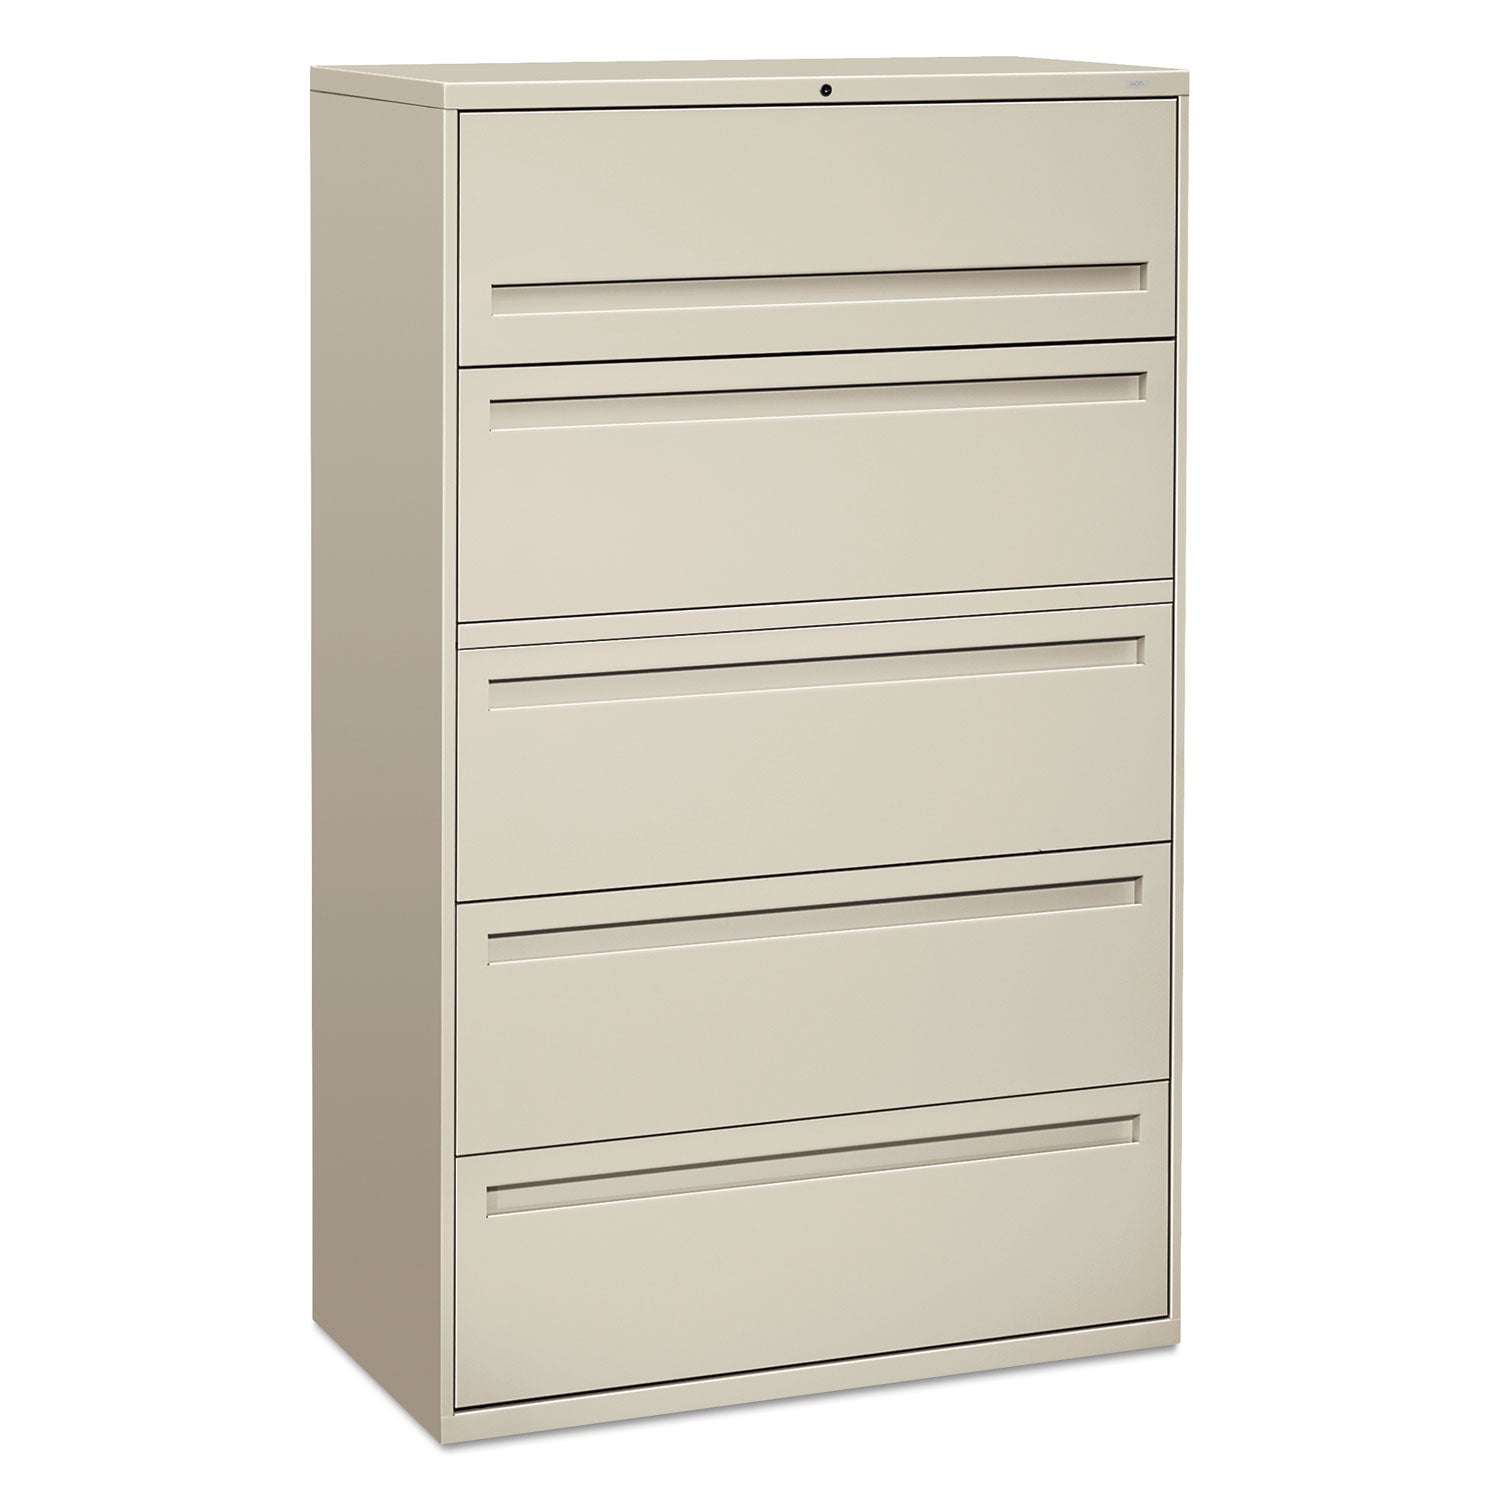 Brigade 700 Series Lateral File, 4 Legal/Letter-Size File Drawers, 1 File Shelf, 1 Post Shelf, Light Gray, 42" x 18" x 64.25 - 